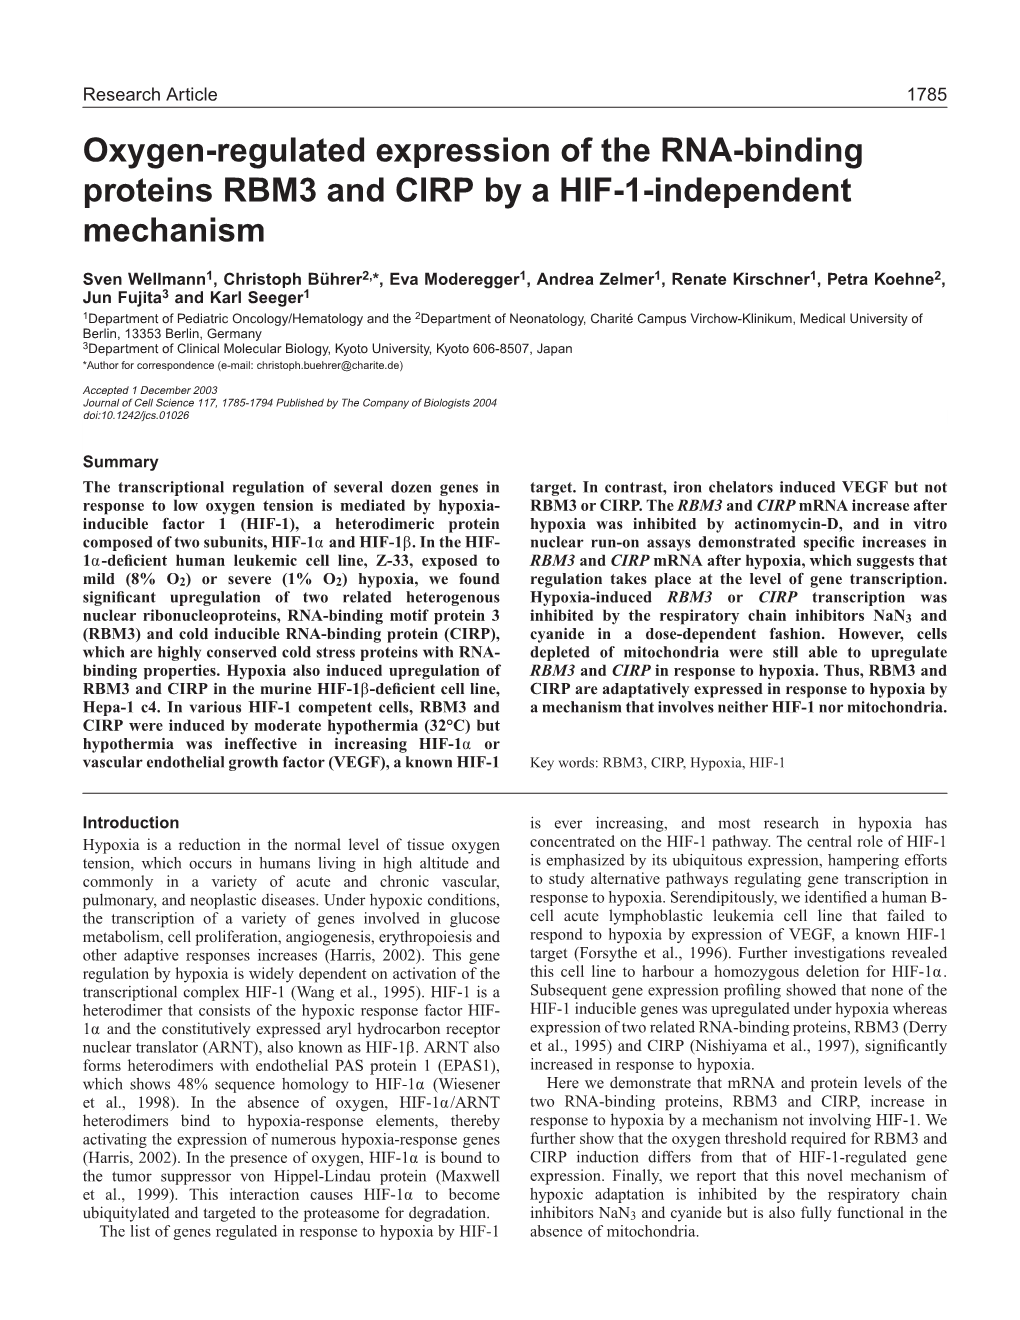 Oxygen-Regulated Expression of the RNA-Binding Proteins RBM3 and CIRP by a HIF-1-Independent Mechanism